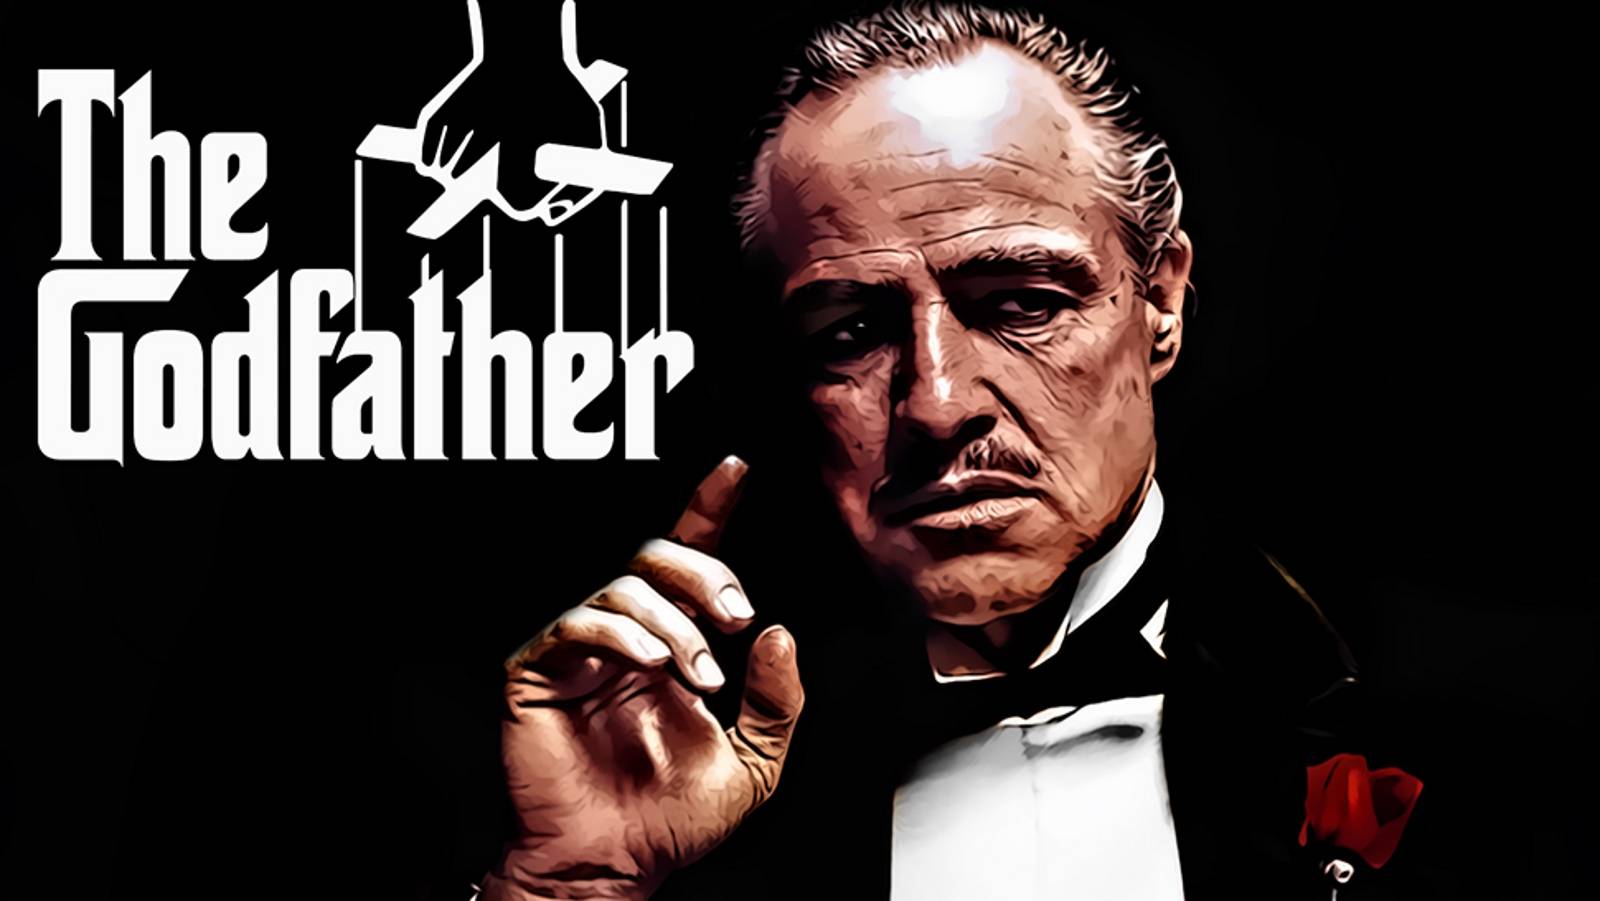 Godfather don't whisper in the ear